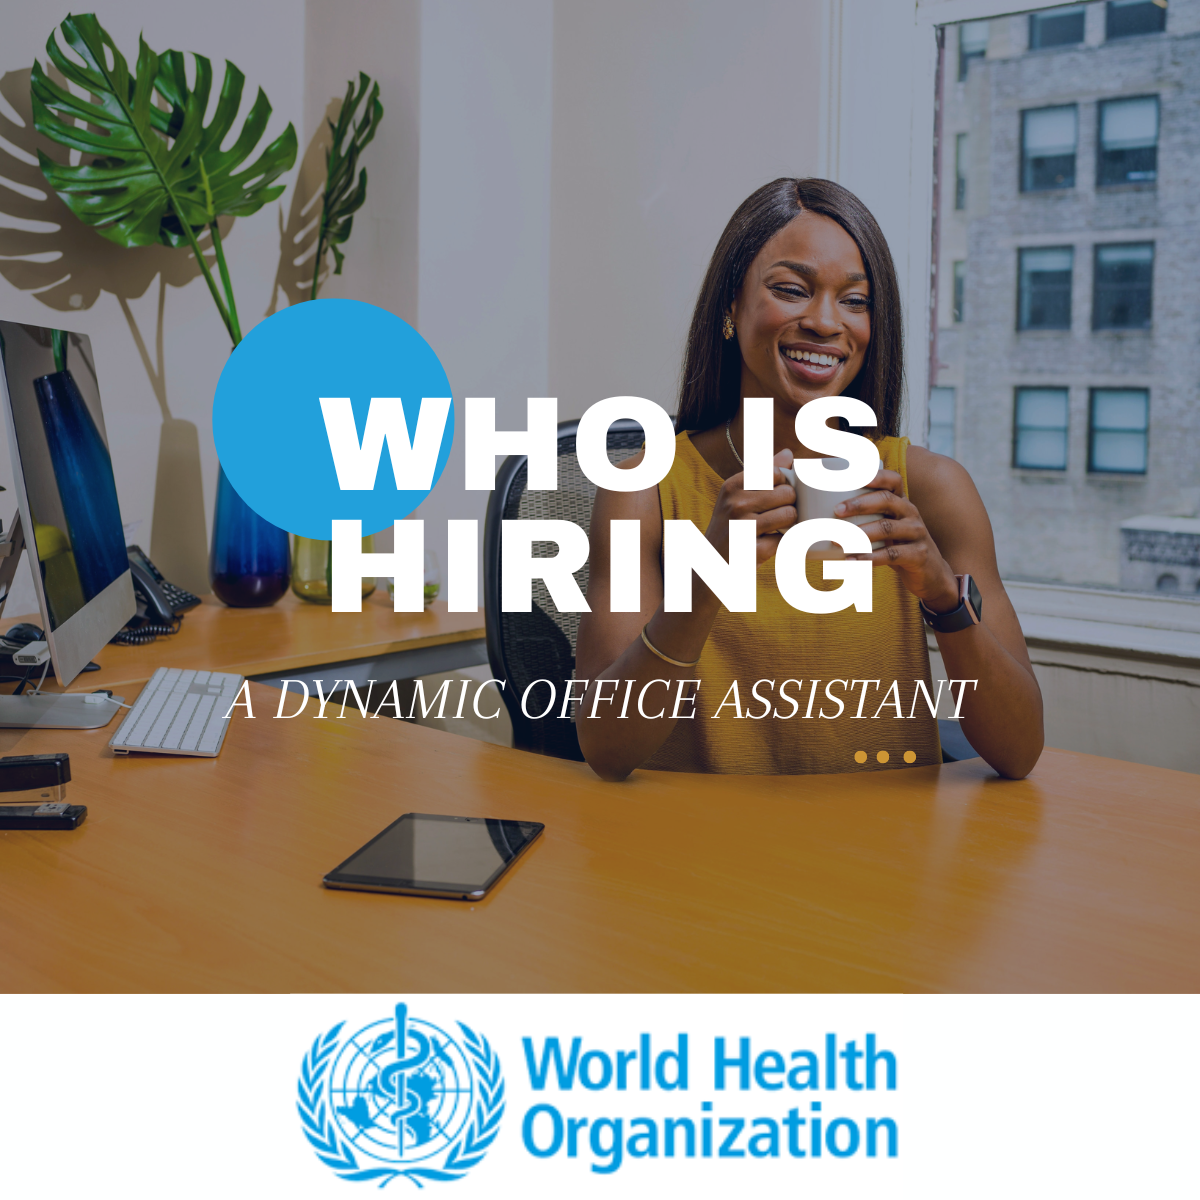 World Health Organization (WHO) IS Currently Seeking For A Dynamic Office Assistant. APPLY NOW